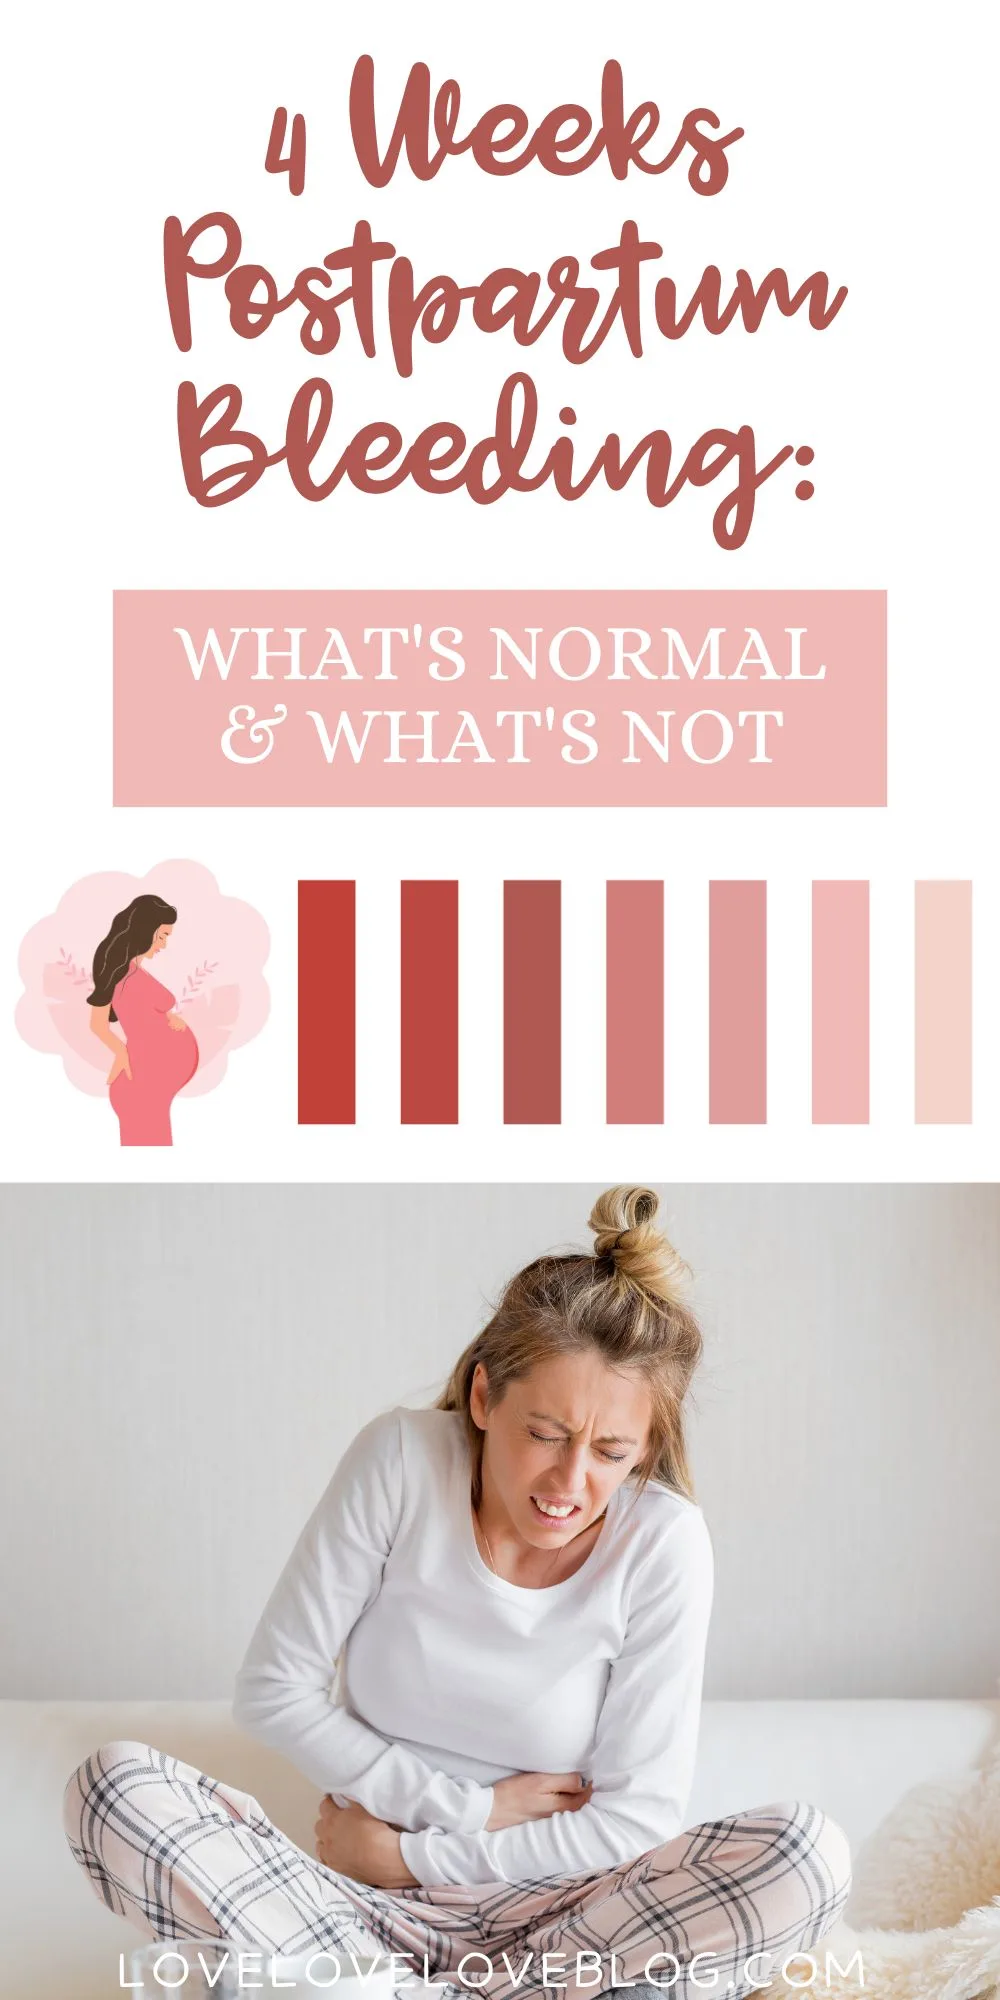 Pinterest graphic with text and collage of woman in pain and postpartum bleeding diagram.